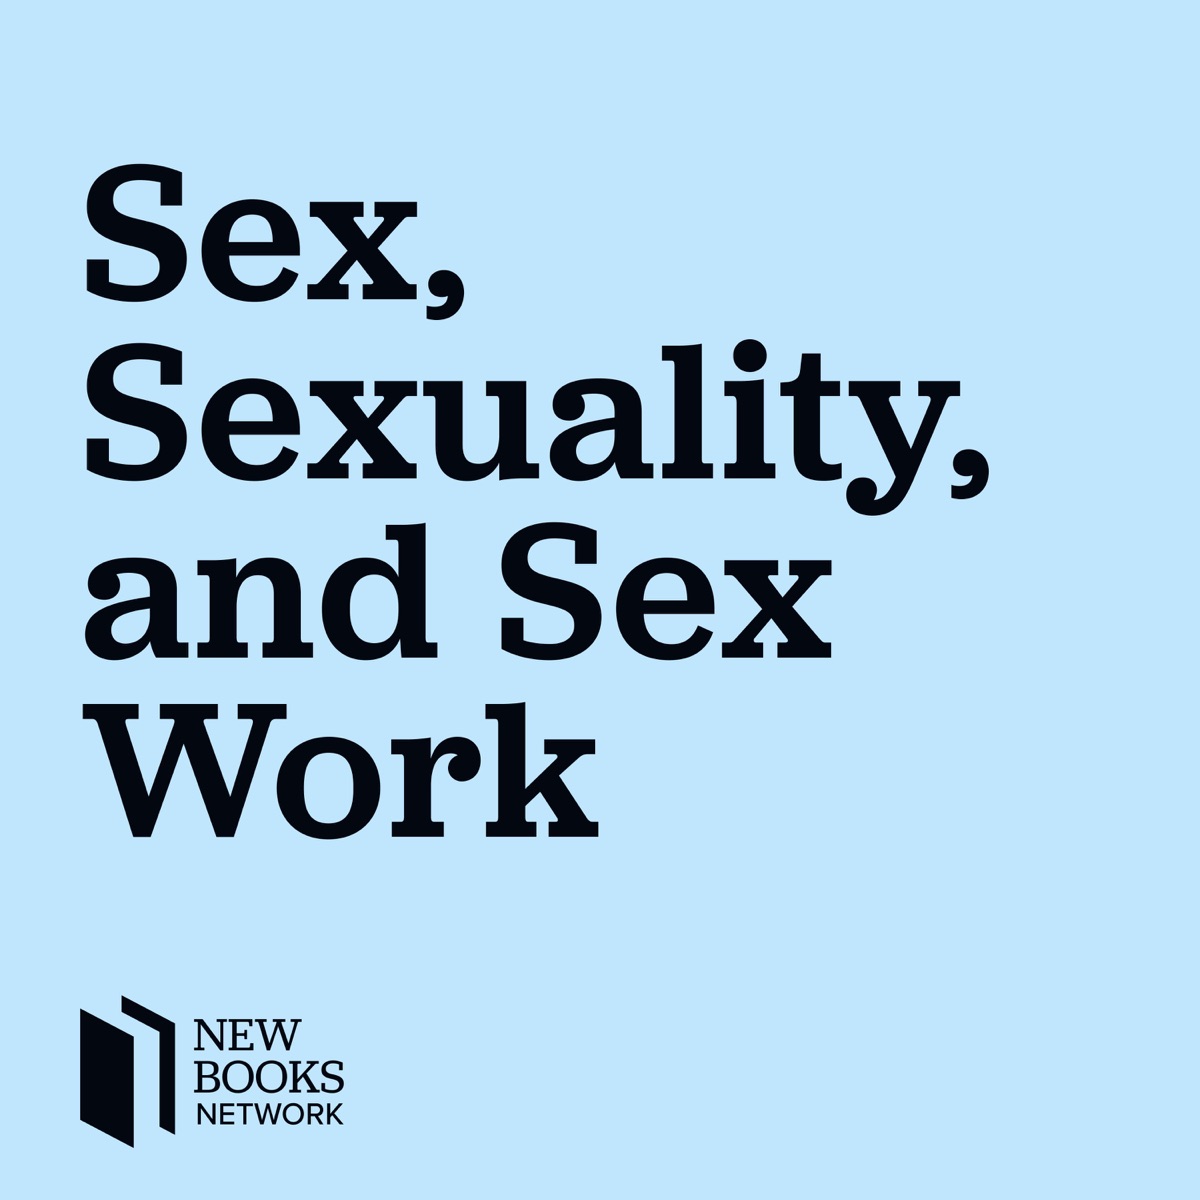 Hd Sex Seil Paik - New Books in Sex, Sexuality, and Sex Work â€“ Podcast â€“ Podtail